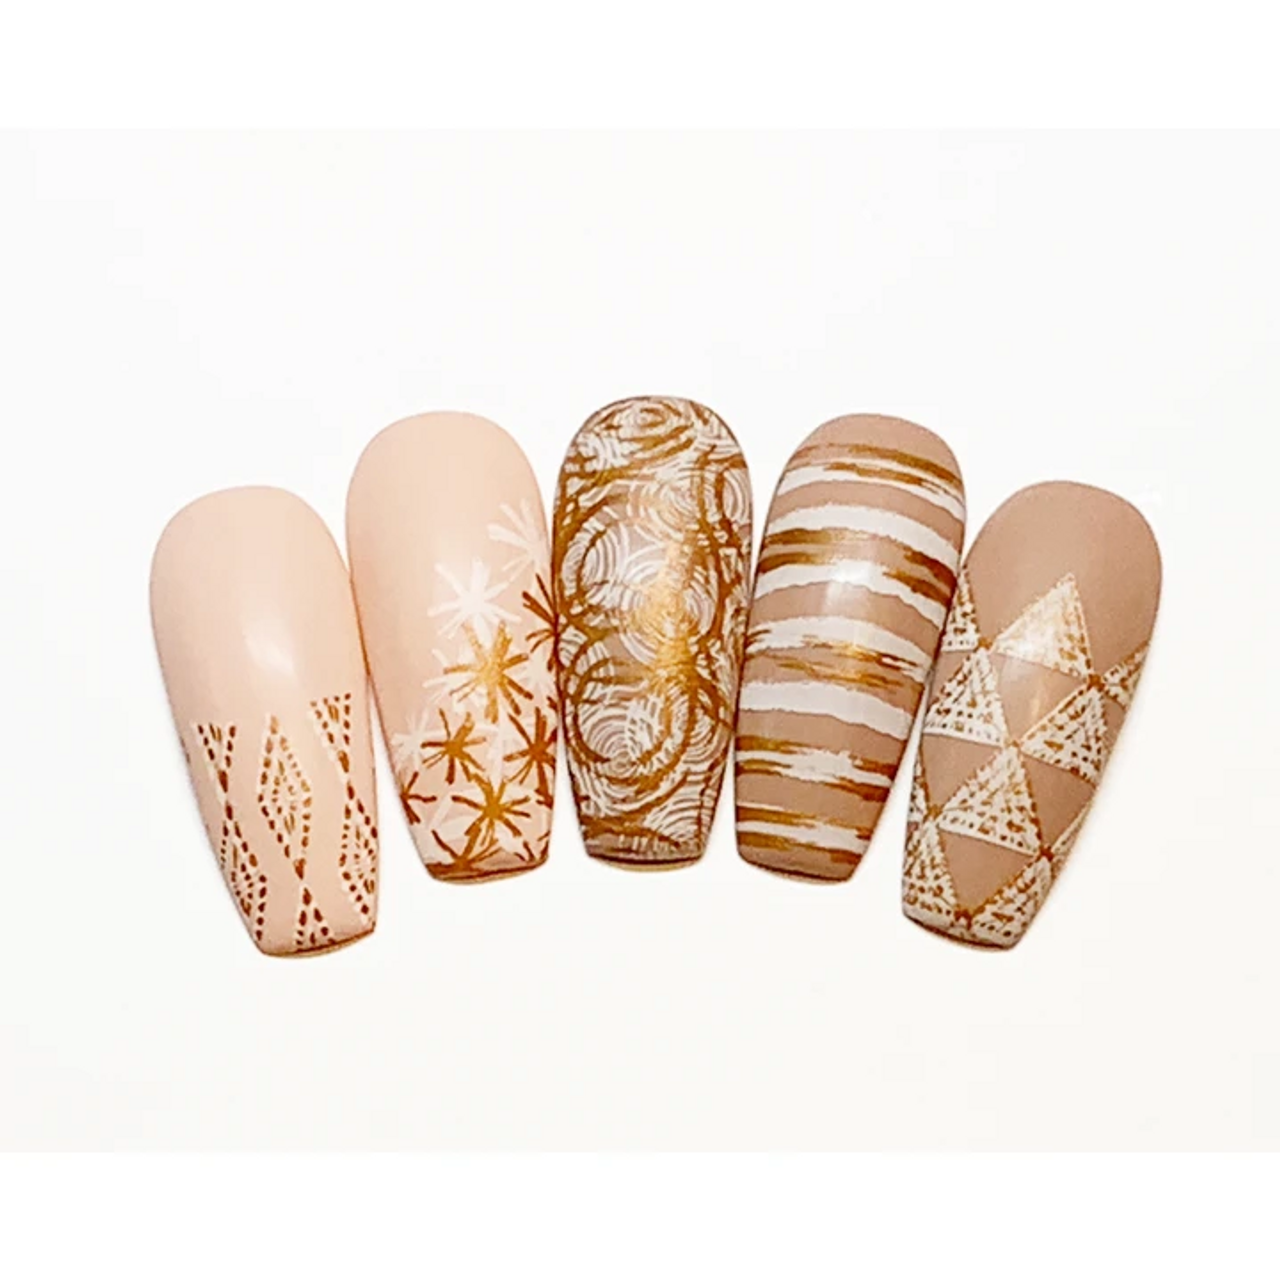 Textiles Series 2 nail art plate by Clear Jelly Stamper, available at ...